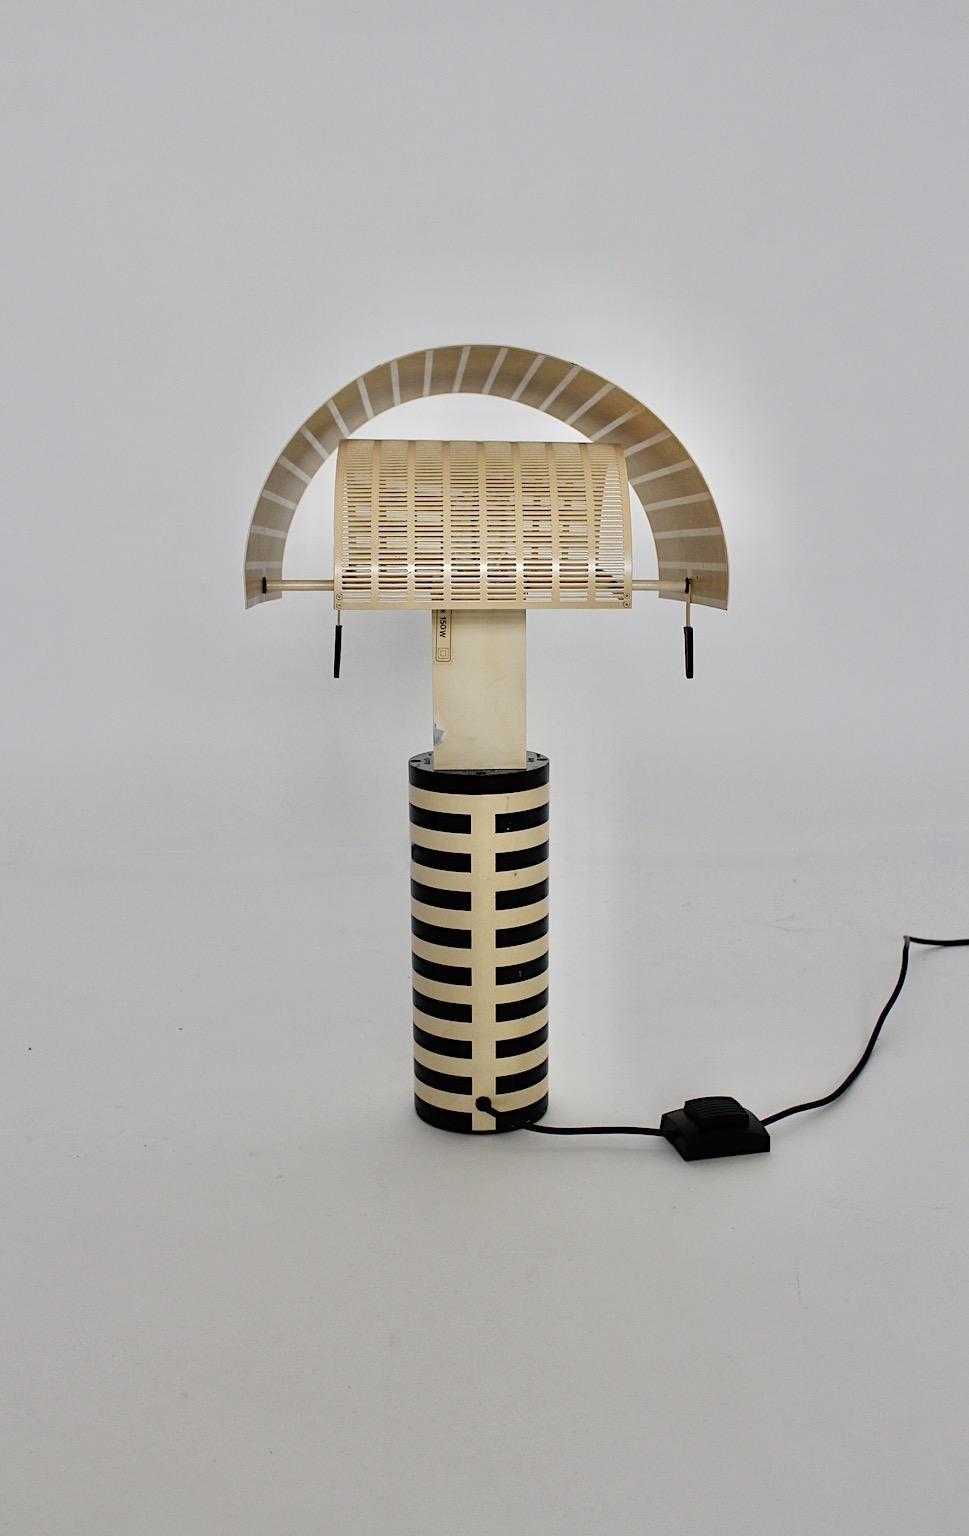 Postmodern authentic vintage table lamp from metal in black white bicolor color by Mario Botta for Artemide 1986, Italy.
An iconic and timeless table lamp with personality in black and white color stripes with two shield like lamp shades, which are